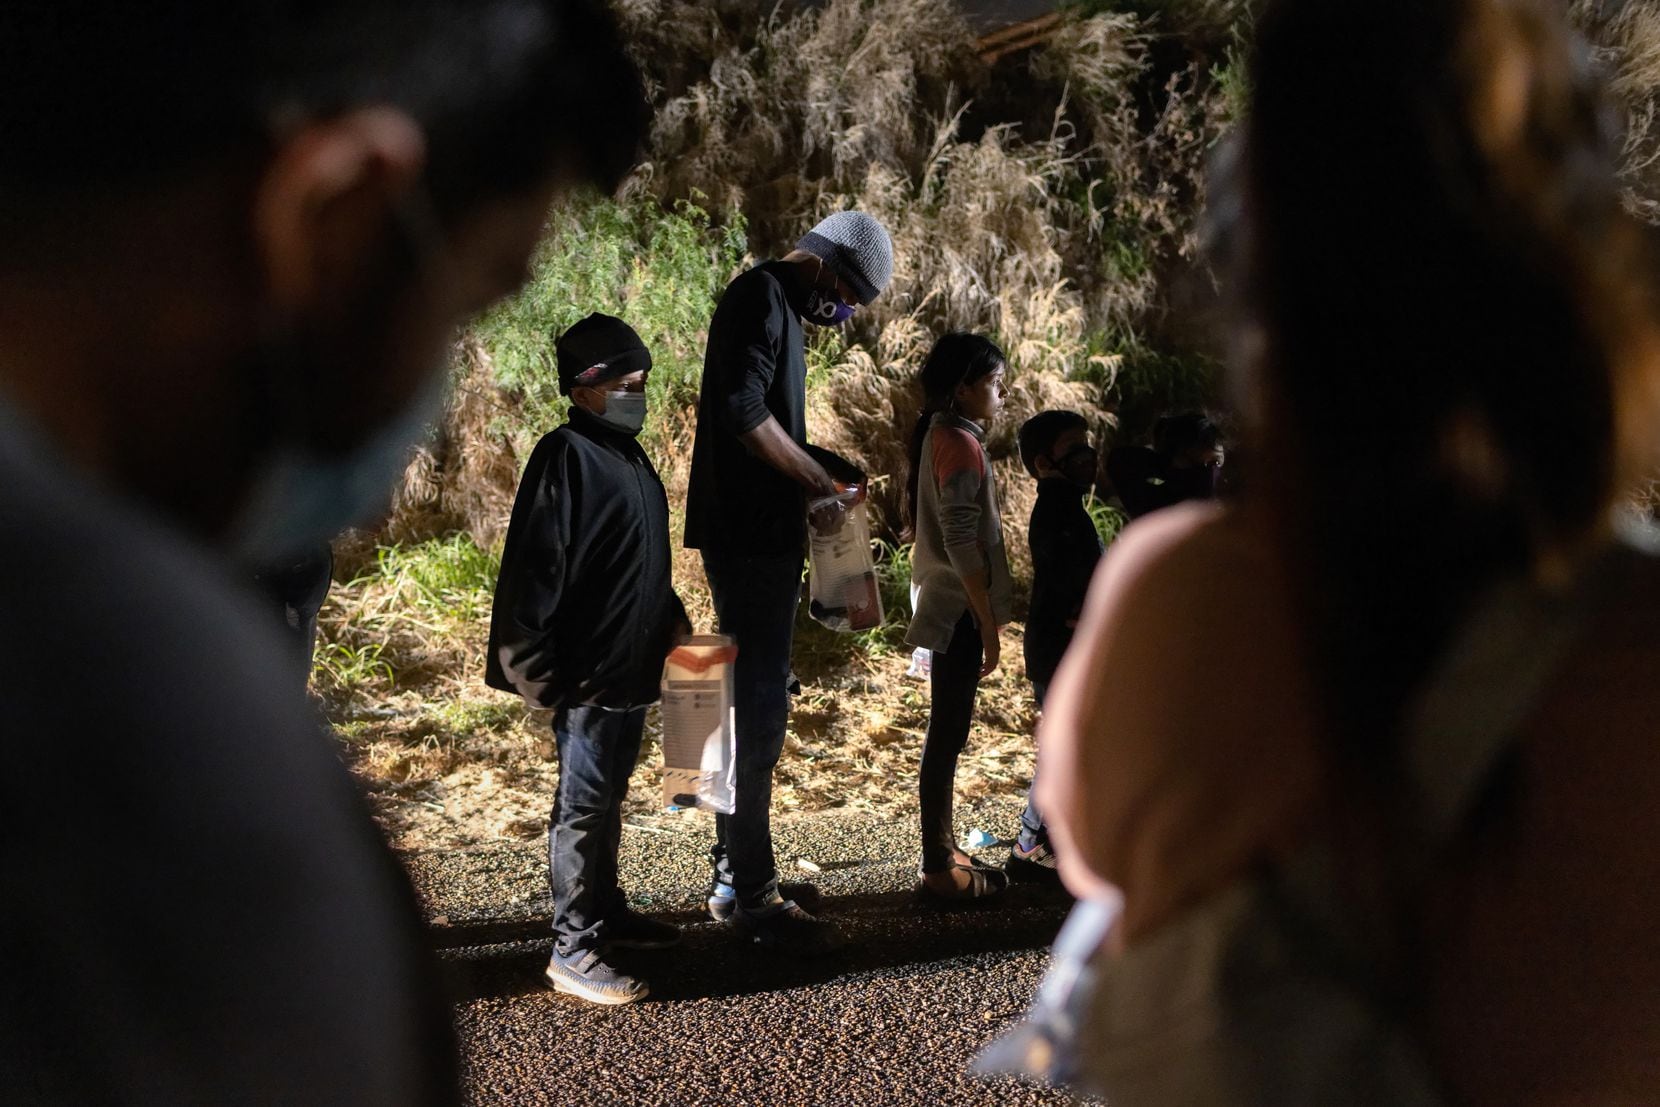 Unaccompanied immigrant minors wait to be processed by Border Patrol agents after they crossed the Rio Grande into South Texas on April 29, 2021 in Roma, Texas. A surge of mostly Central American immigrants crossing into the United States has challenged U.S. immigration agencies along the border.